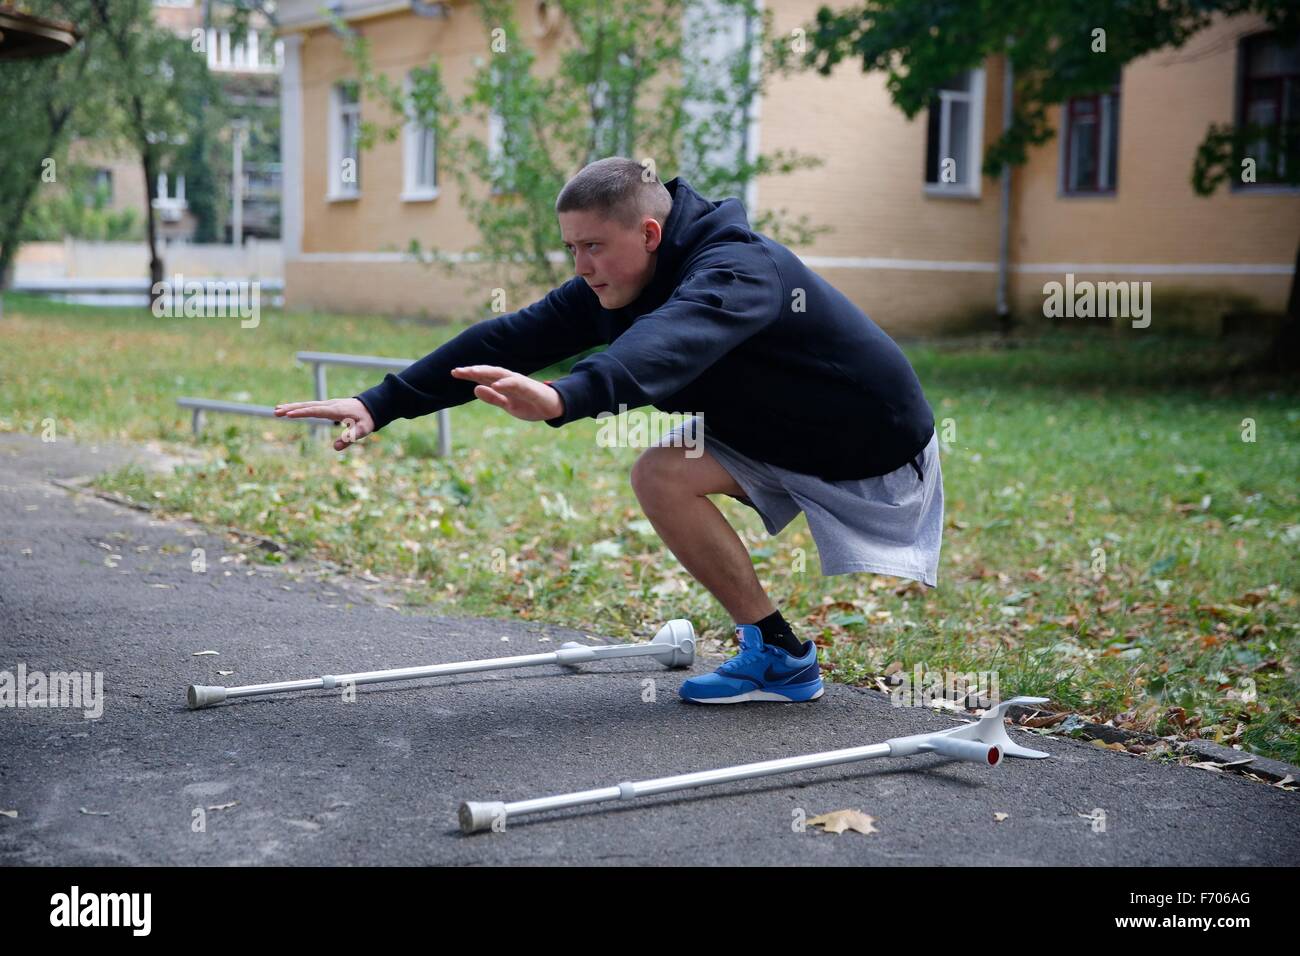 Sergiy Ilnivsky, 19-years-old, rehabilitates after losing one of his legs while fighting with the 79th Airmobile Battalion of the Ukrainian Army near Lugansk during the countries violent civll war between Ukrainian patriots, and pro-Russian separatists. Ilnivksy said 40 Grad rockets were fired from Russian territory onto his unit's position within a minute in July. Lugansk is located just inside Ukrainian territory. Stock Photo